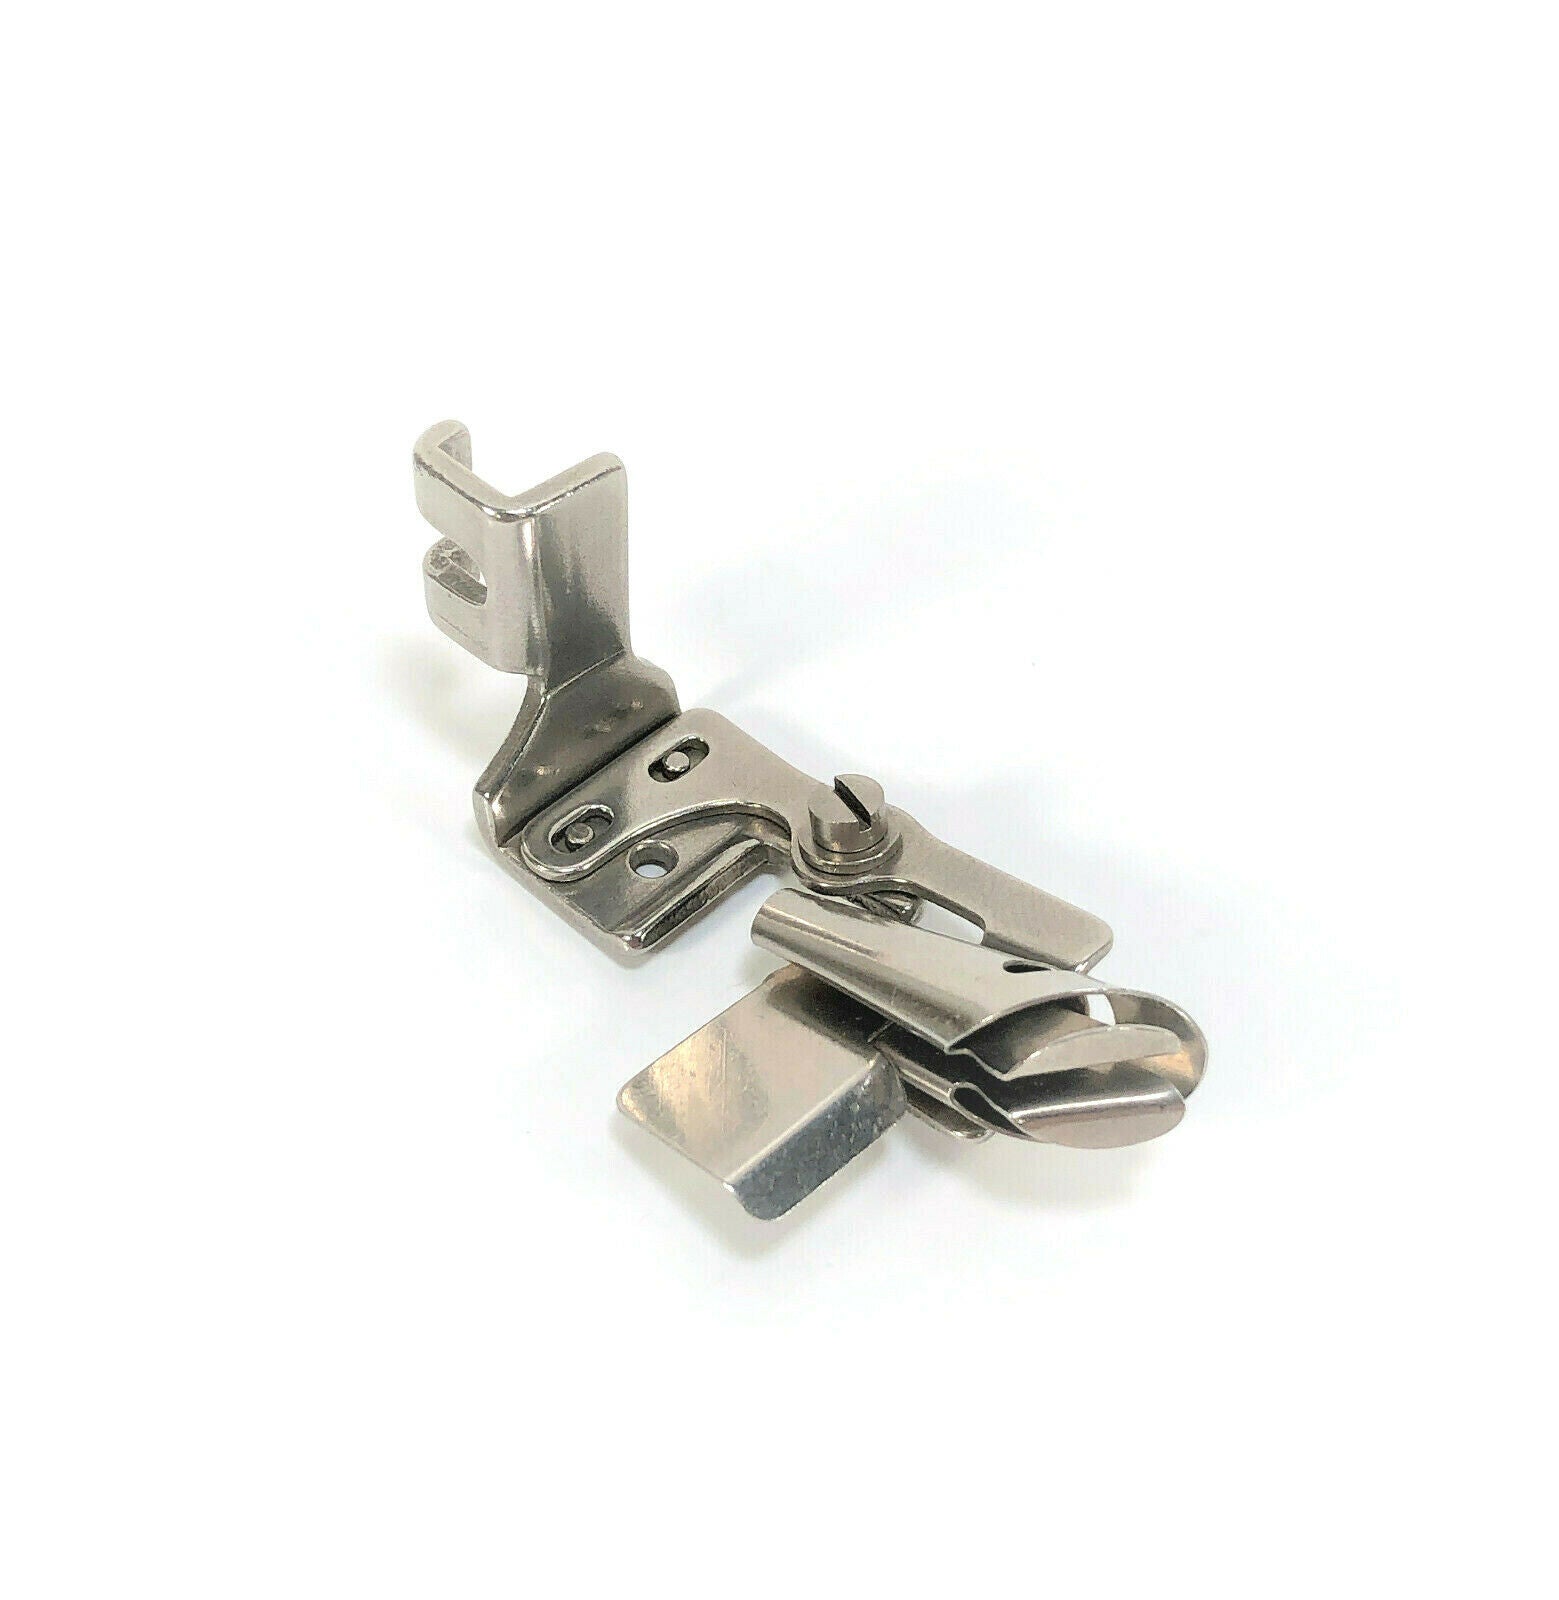 Sewing Machine Presser Foot Sewing Foot Attachments Zigzag Presser Foot  Adjustable Guide Foot Bias Binder Foot For Manufacturer